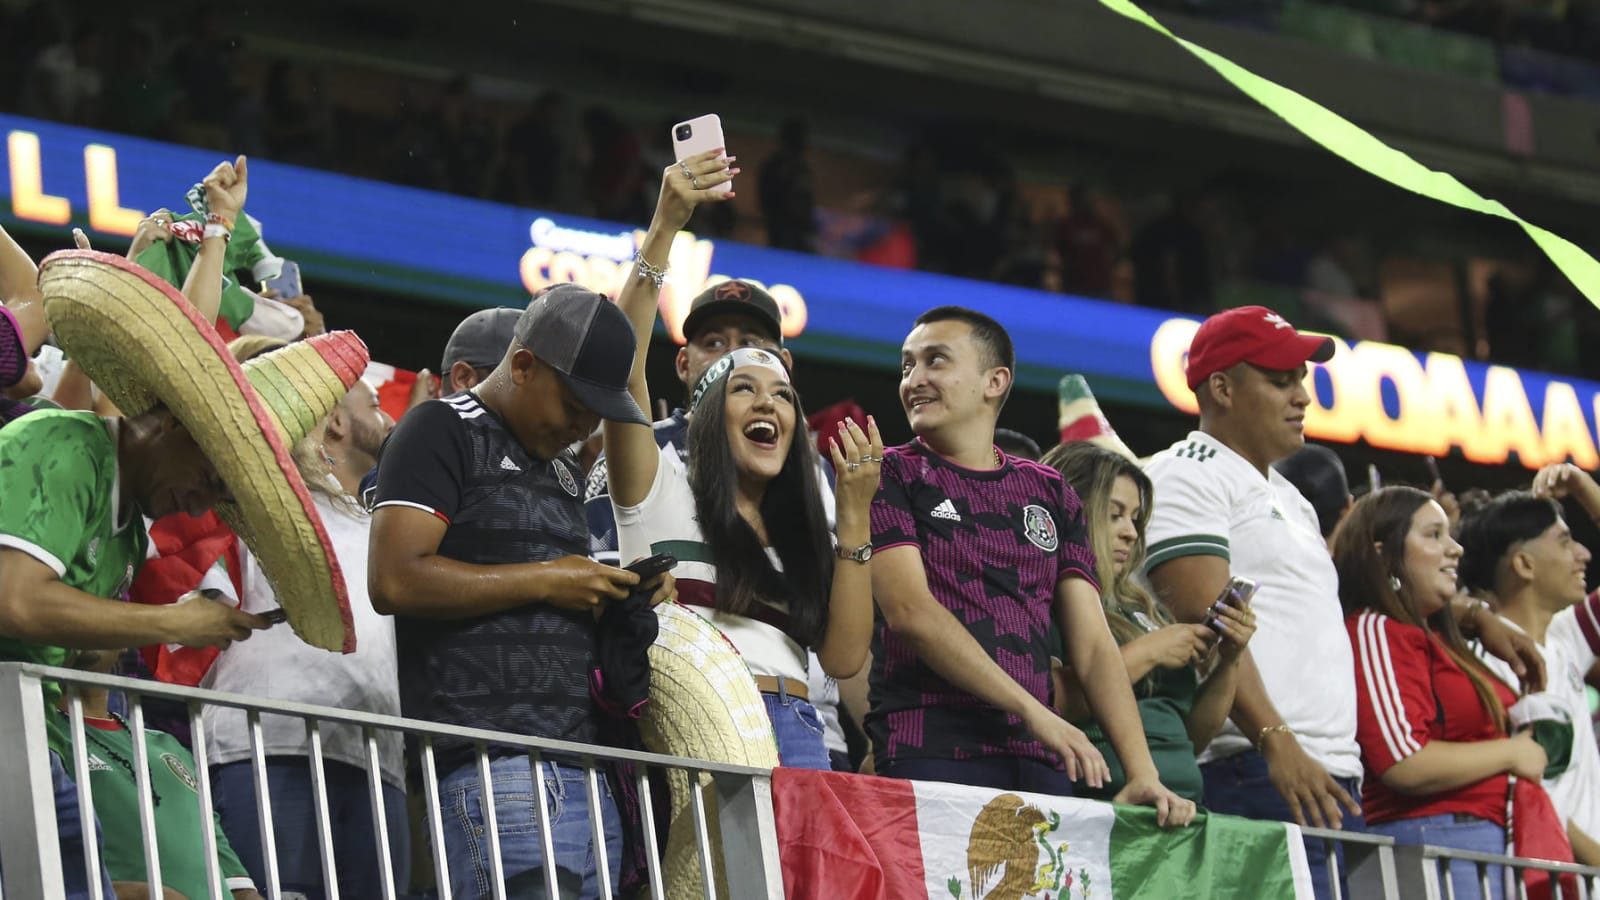 Mexico beats Canada semi after pause in play due to homophobic chant